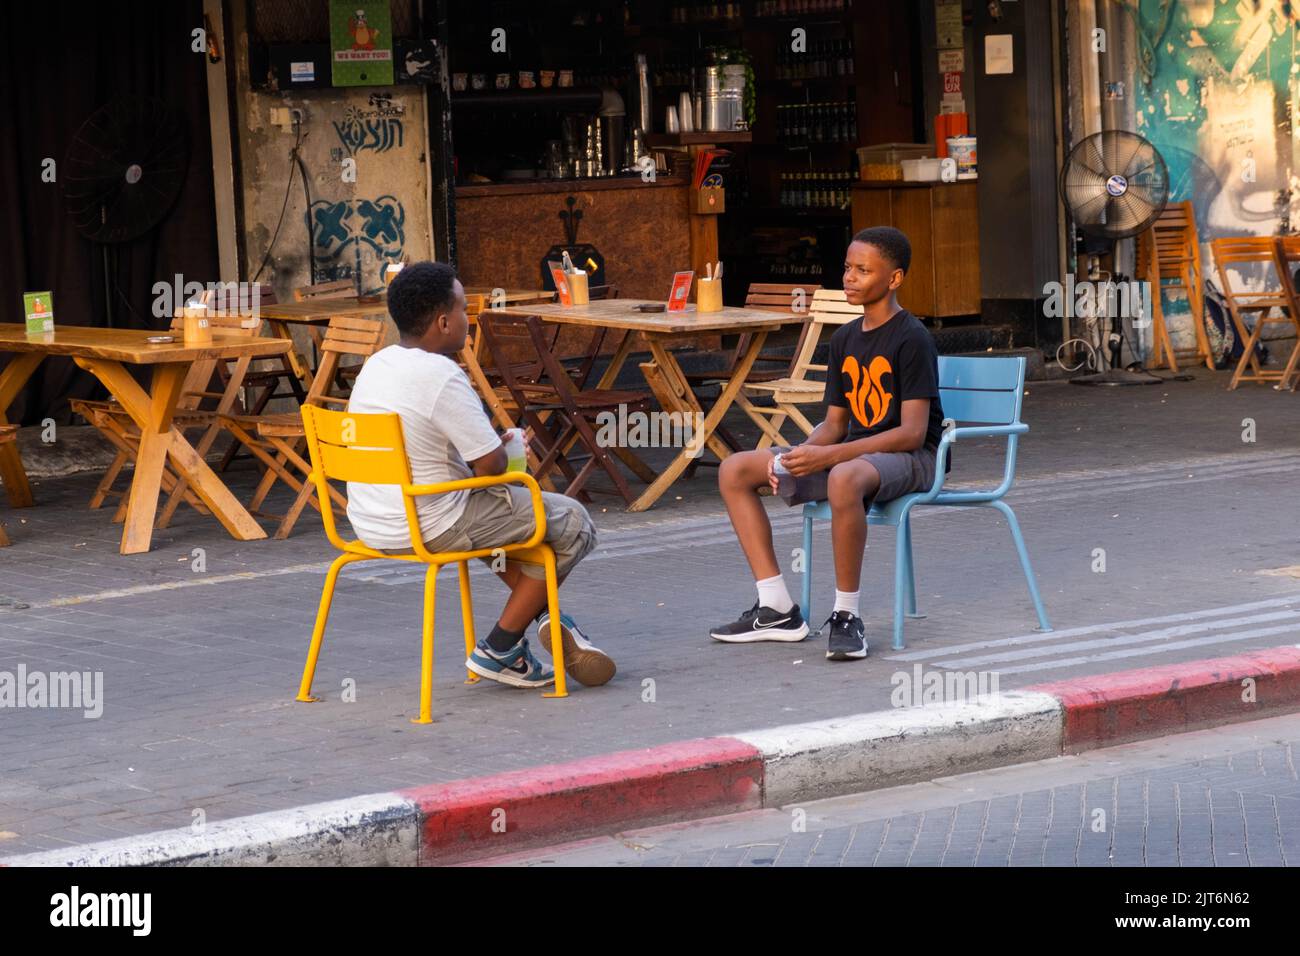 Black boys sitting on contrasting chairs, exchanging glances on Jaffa street, with bar and restaurant backdrop Stock Photo